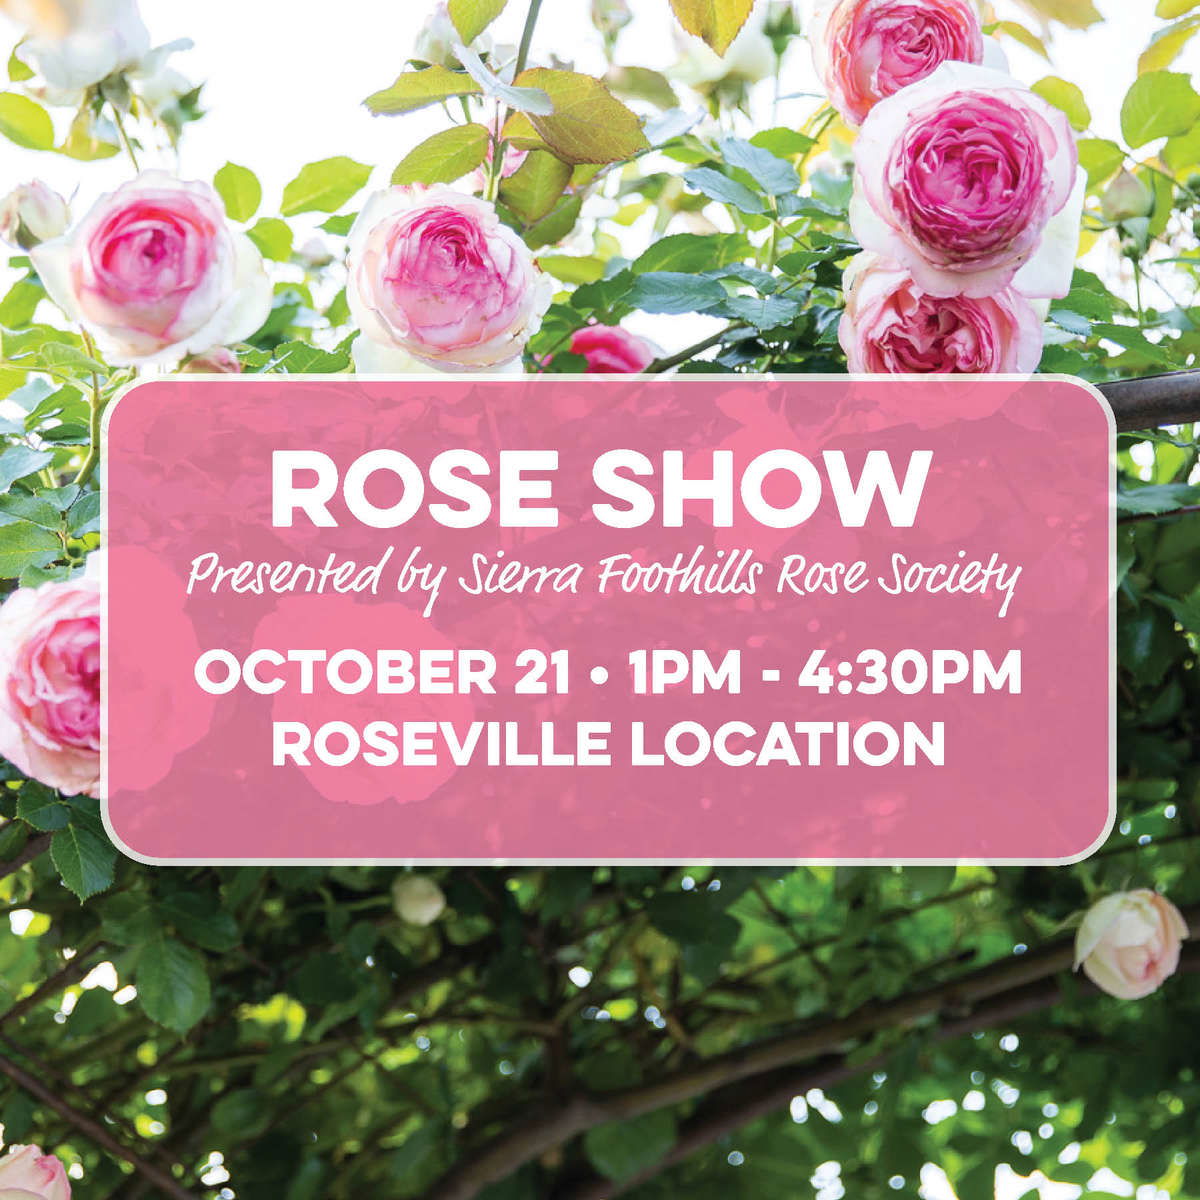 Rose Show: Presented By Sierra Foothills Rose Society October 15 1 PM to 4:30 PM Folsom Location Only